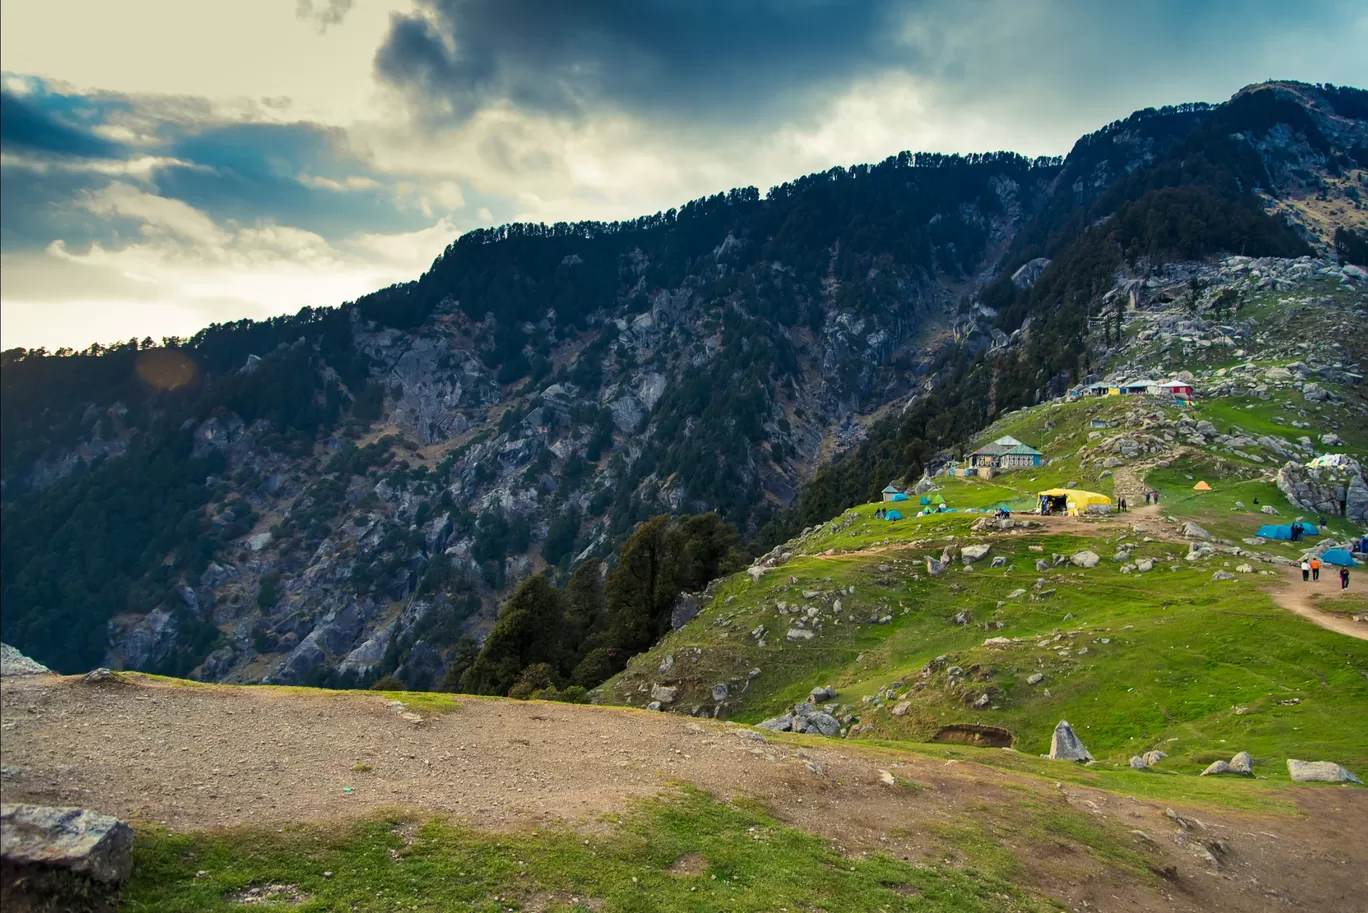 Photo of Triund By Riding the Rainbow.